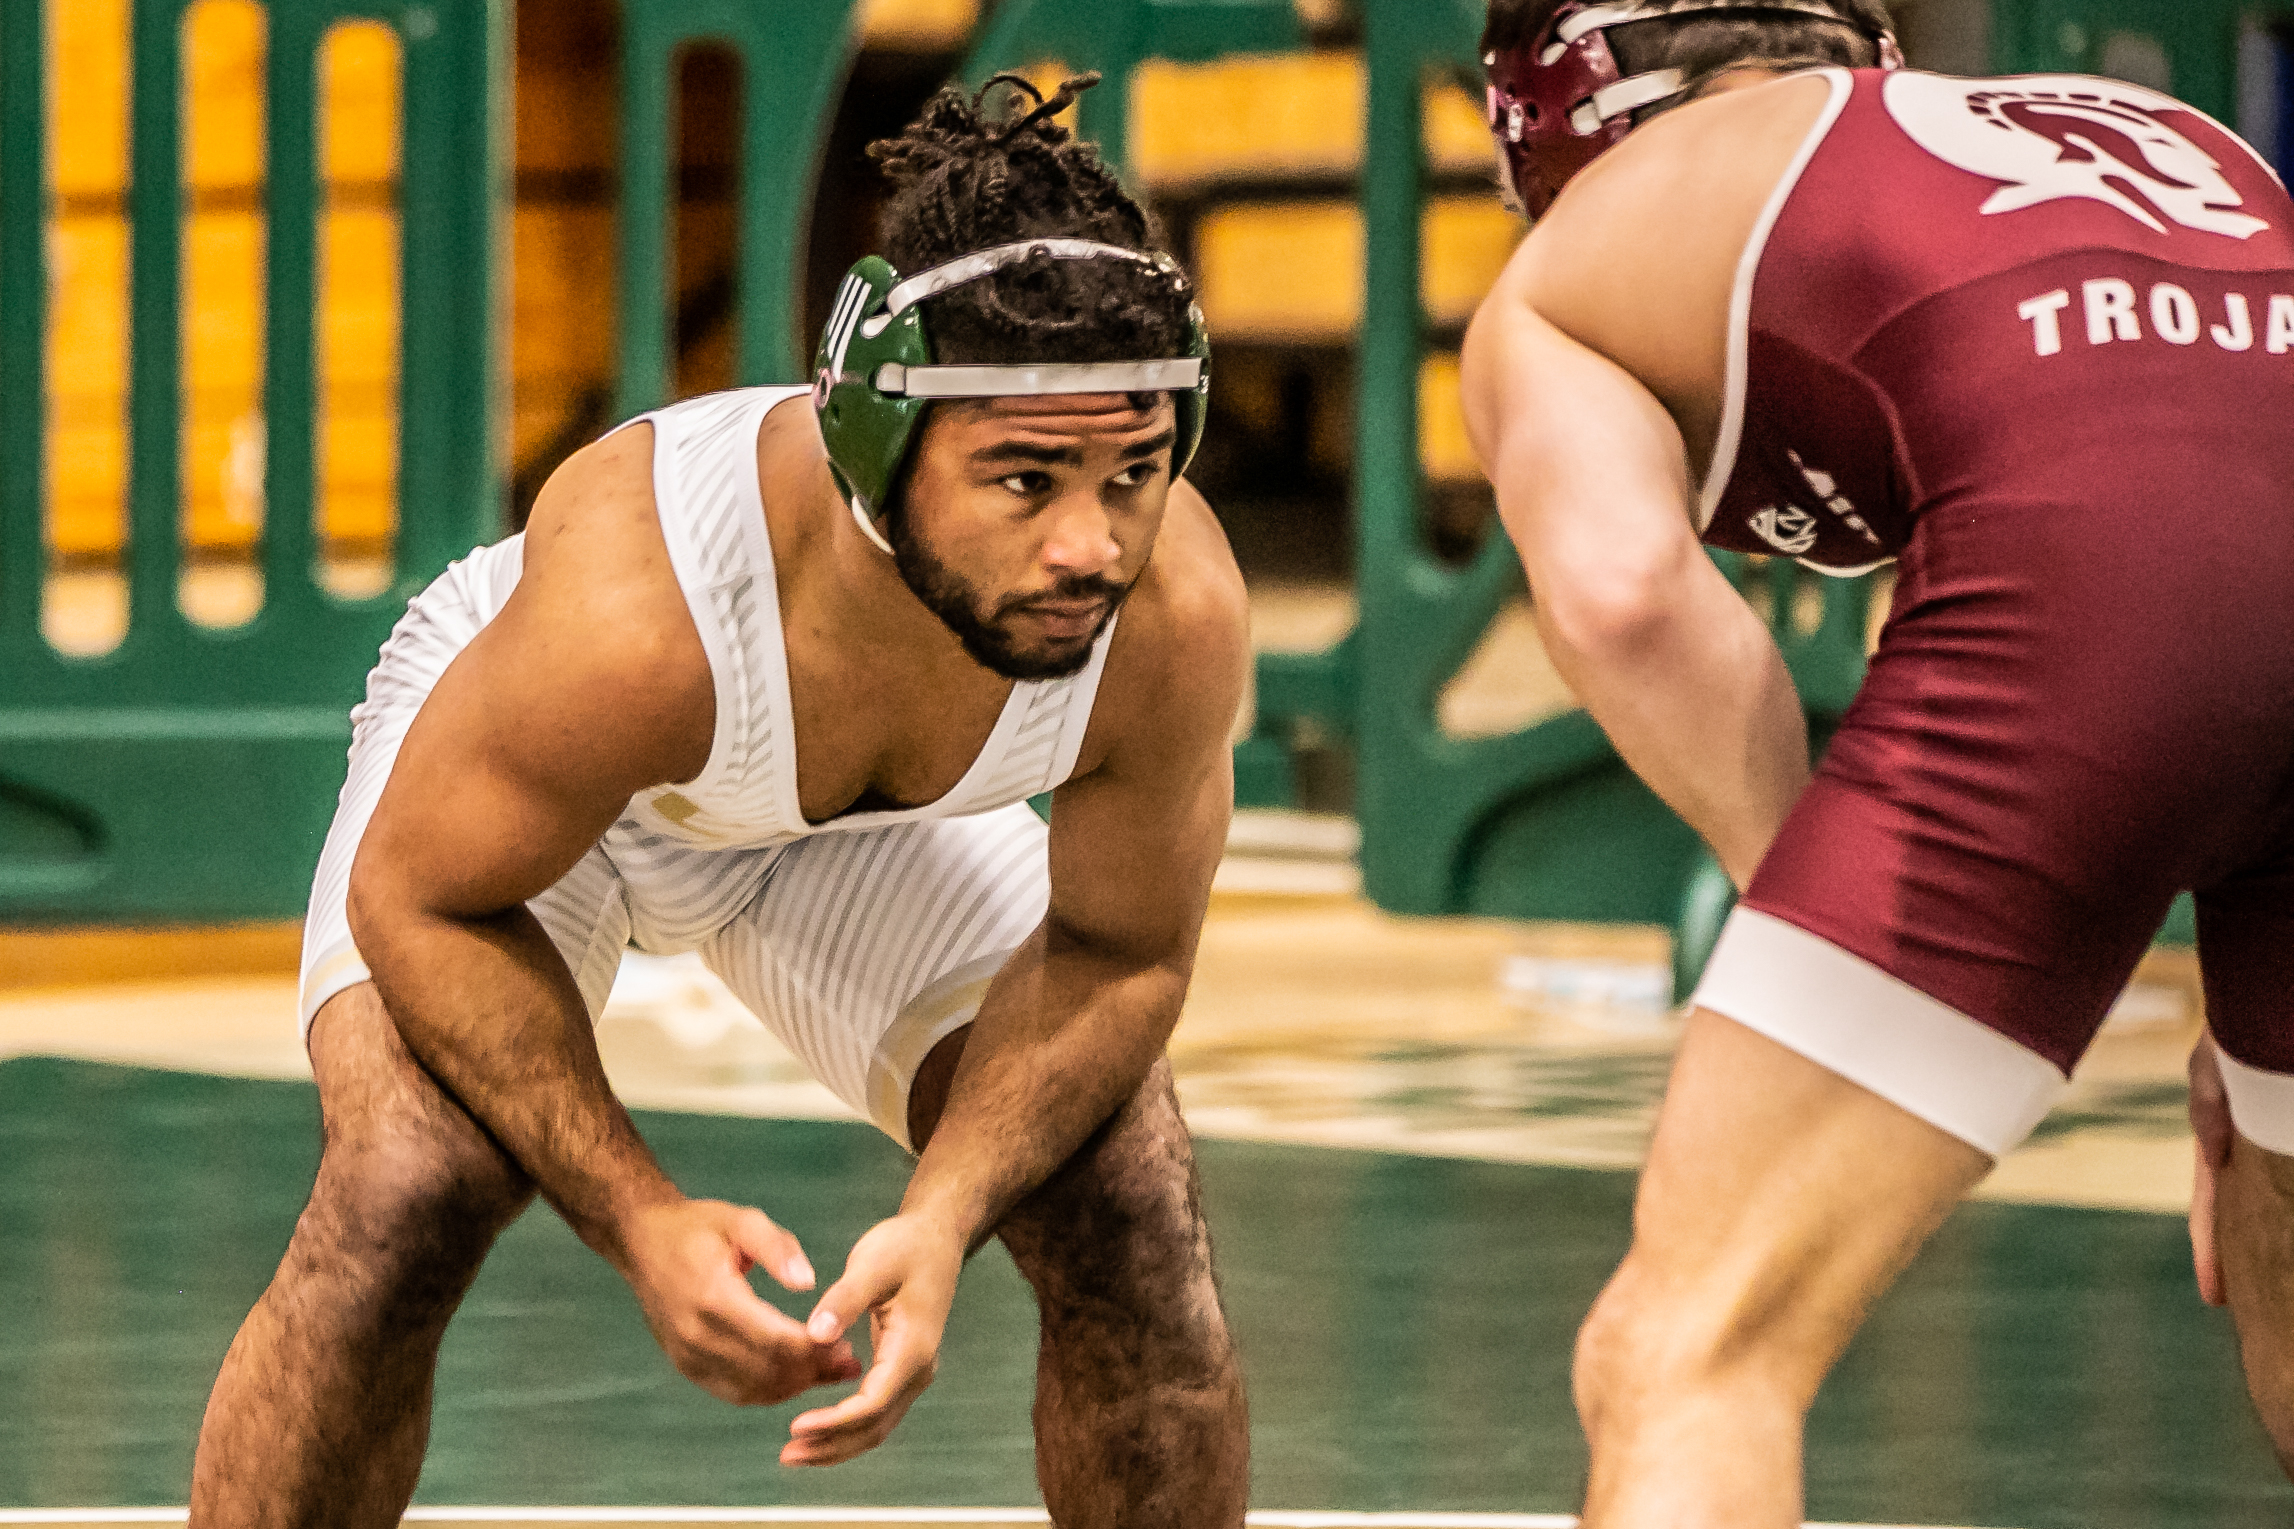 Dom Demas, a top-rated wrestler, transferred to Cal Poly to wrestle and earna master's degree.